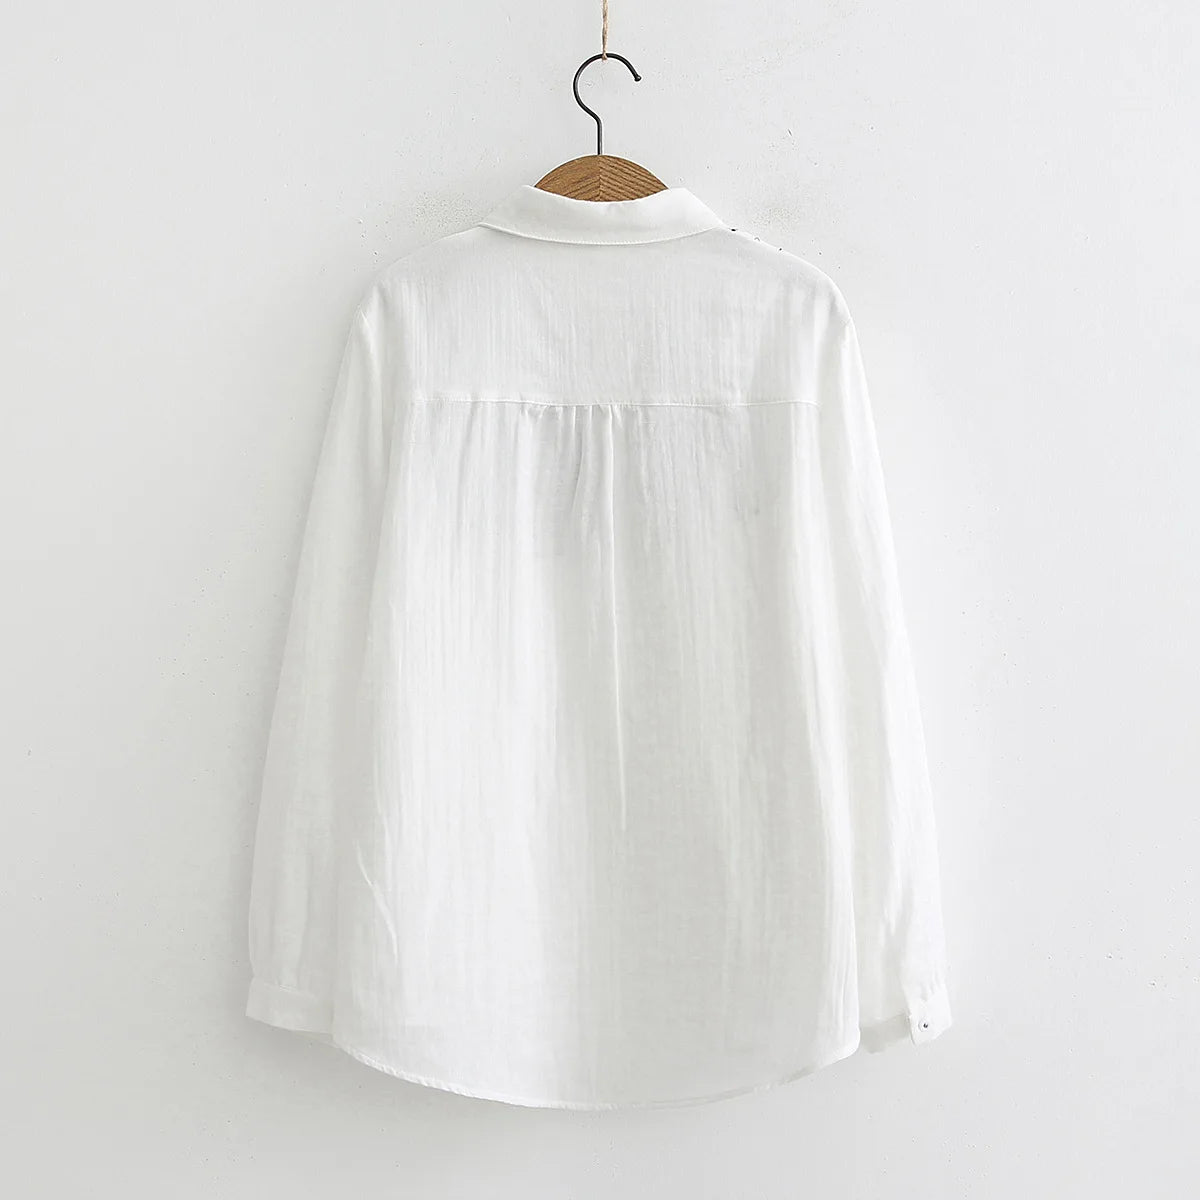 2 Layer Cotton shirt for woman, White Shirts, Embroidery, Full Sleeve, Pockets, Loose Blouse Casual Tops Spring KilyClothing